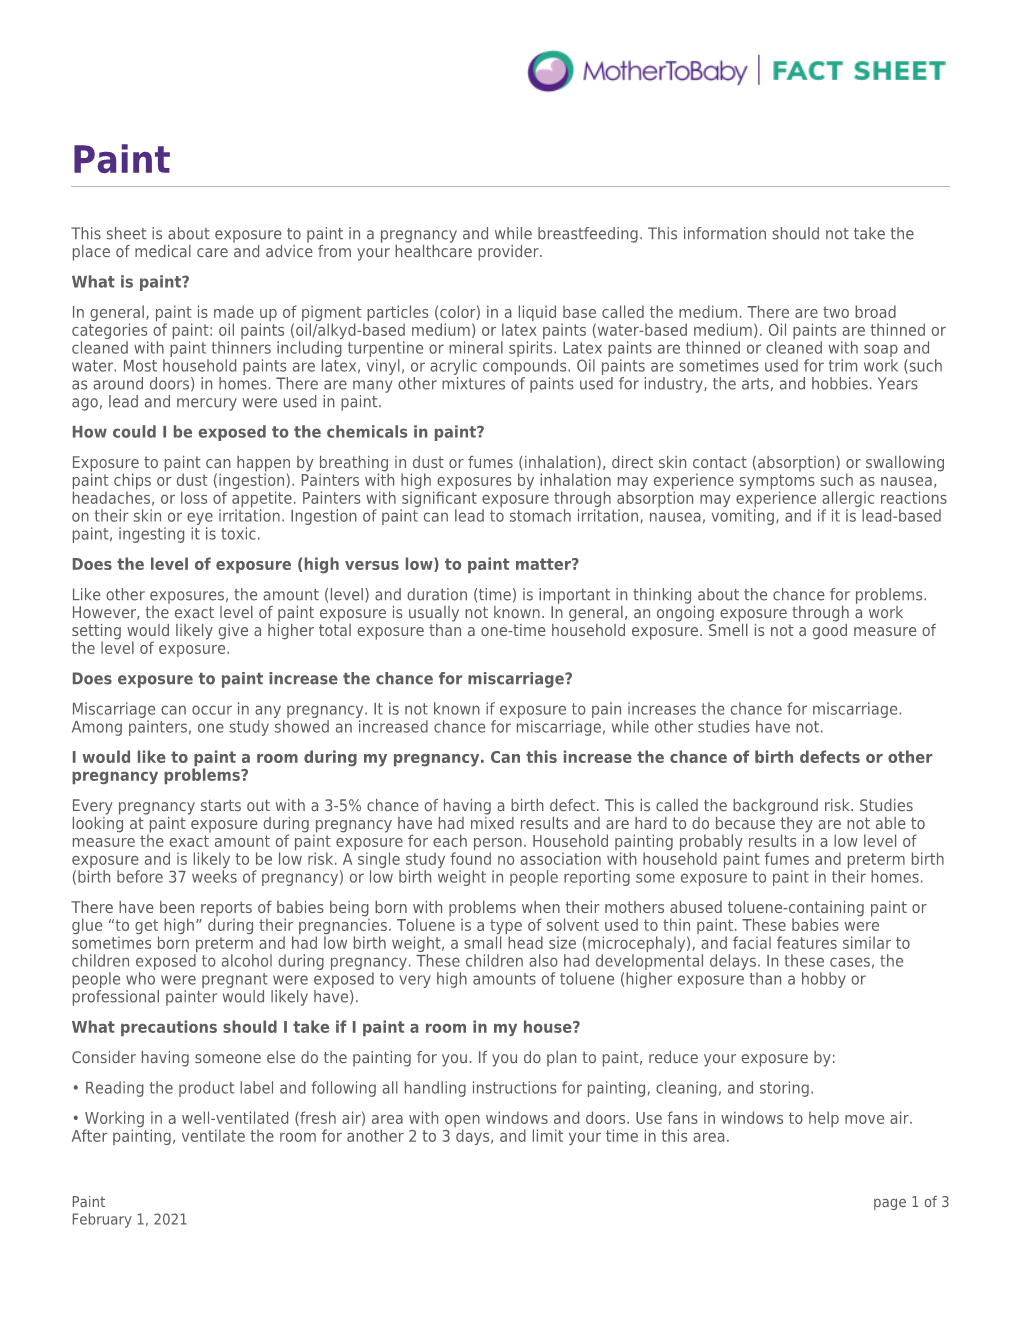 Paint and Pregnancy